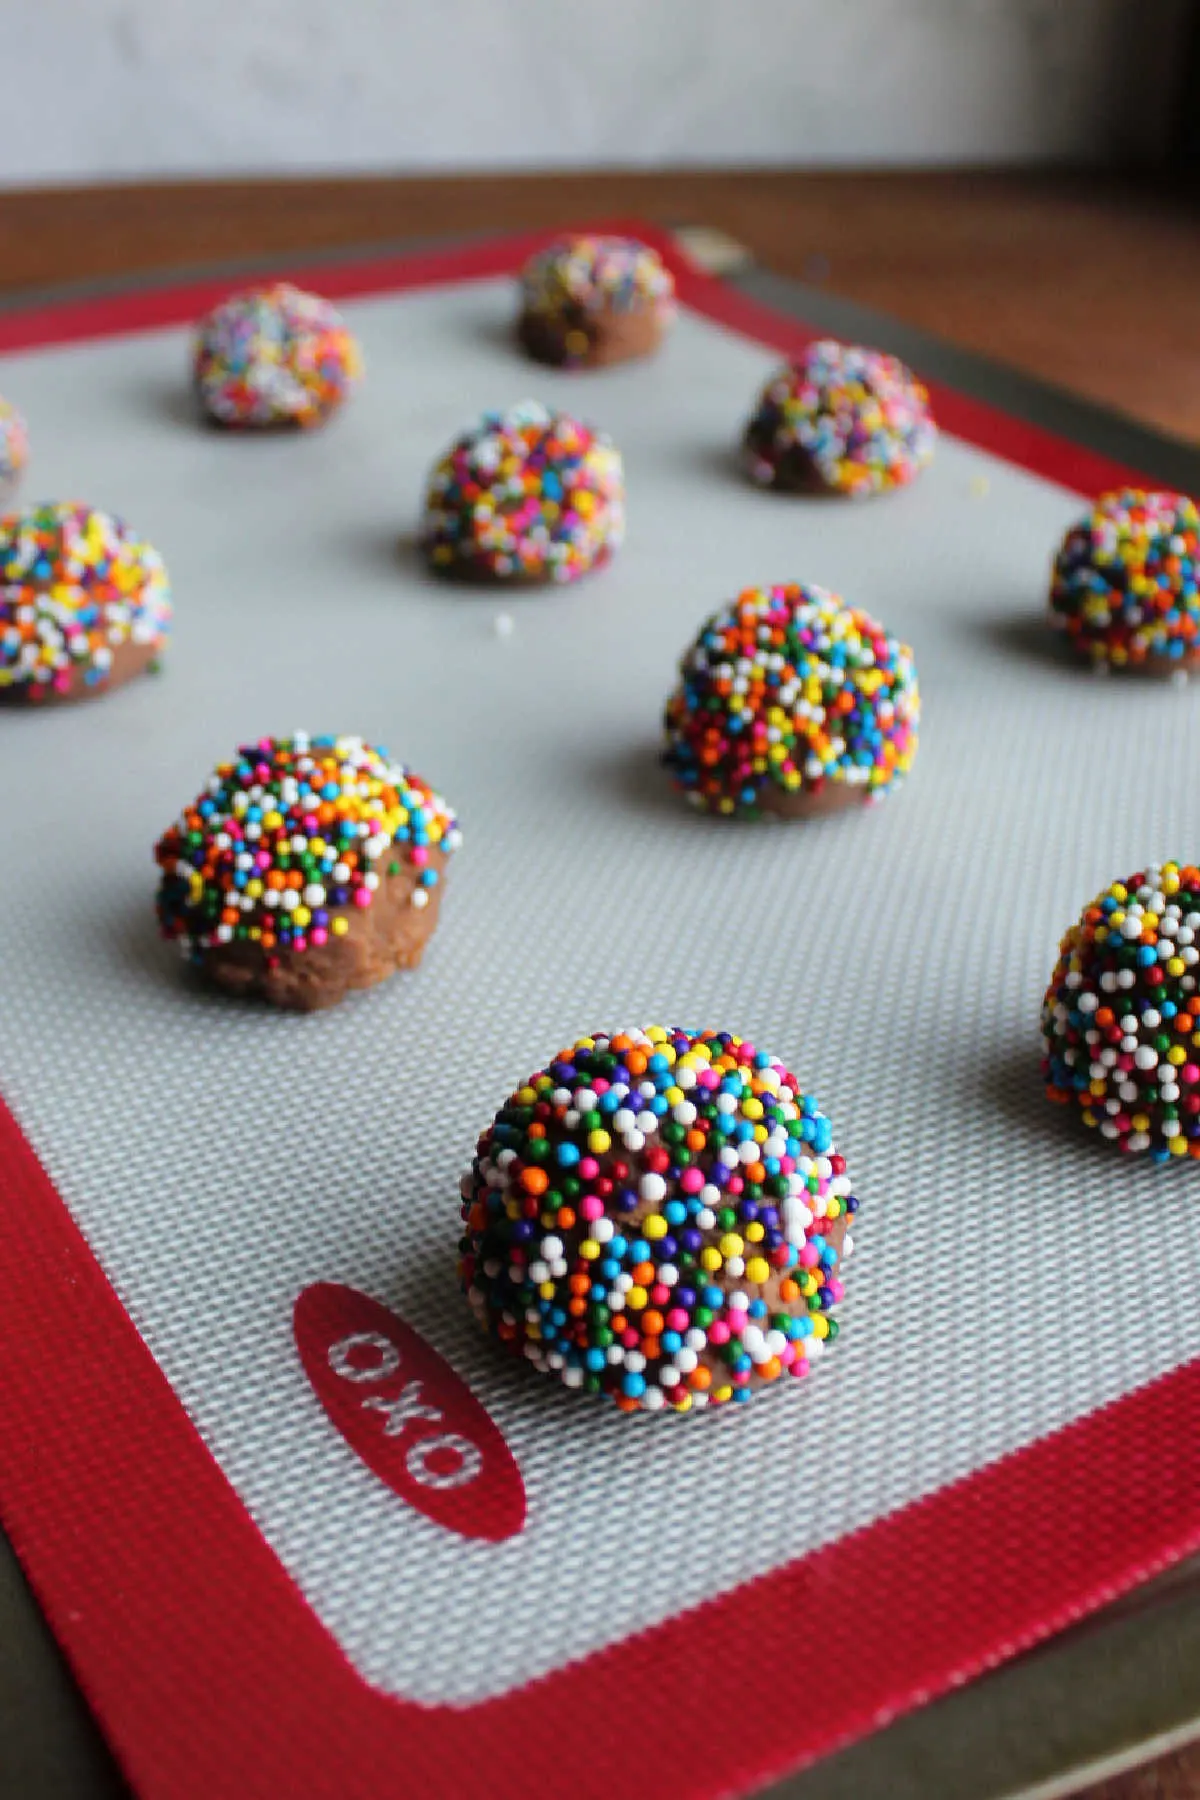 Scoops of chocolate cookie dough rolled in colorful sprinkles on a silicone baking mat covered pan.